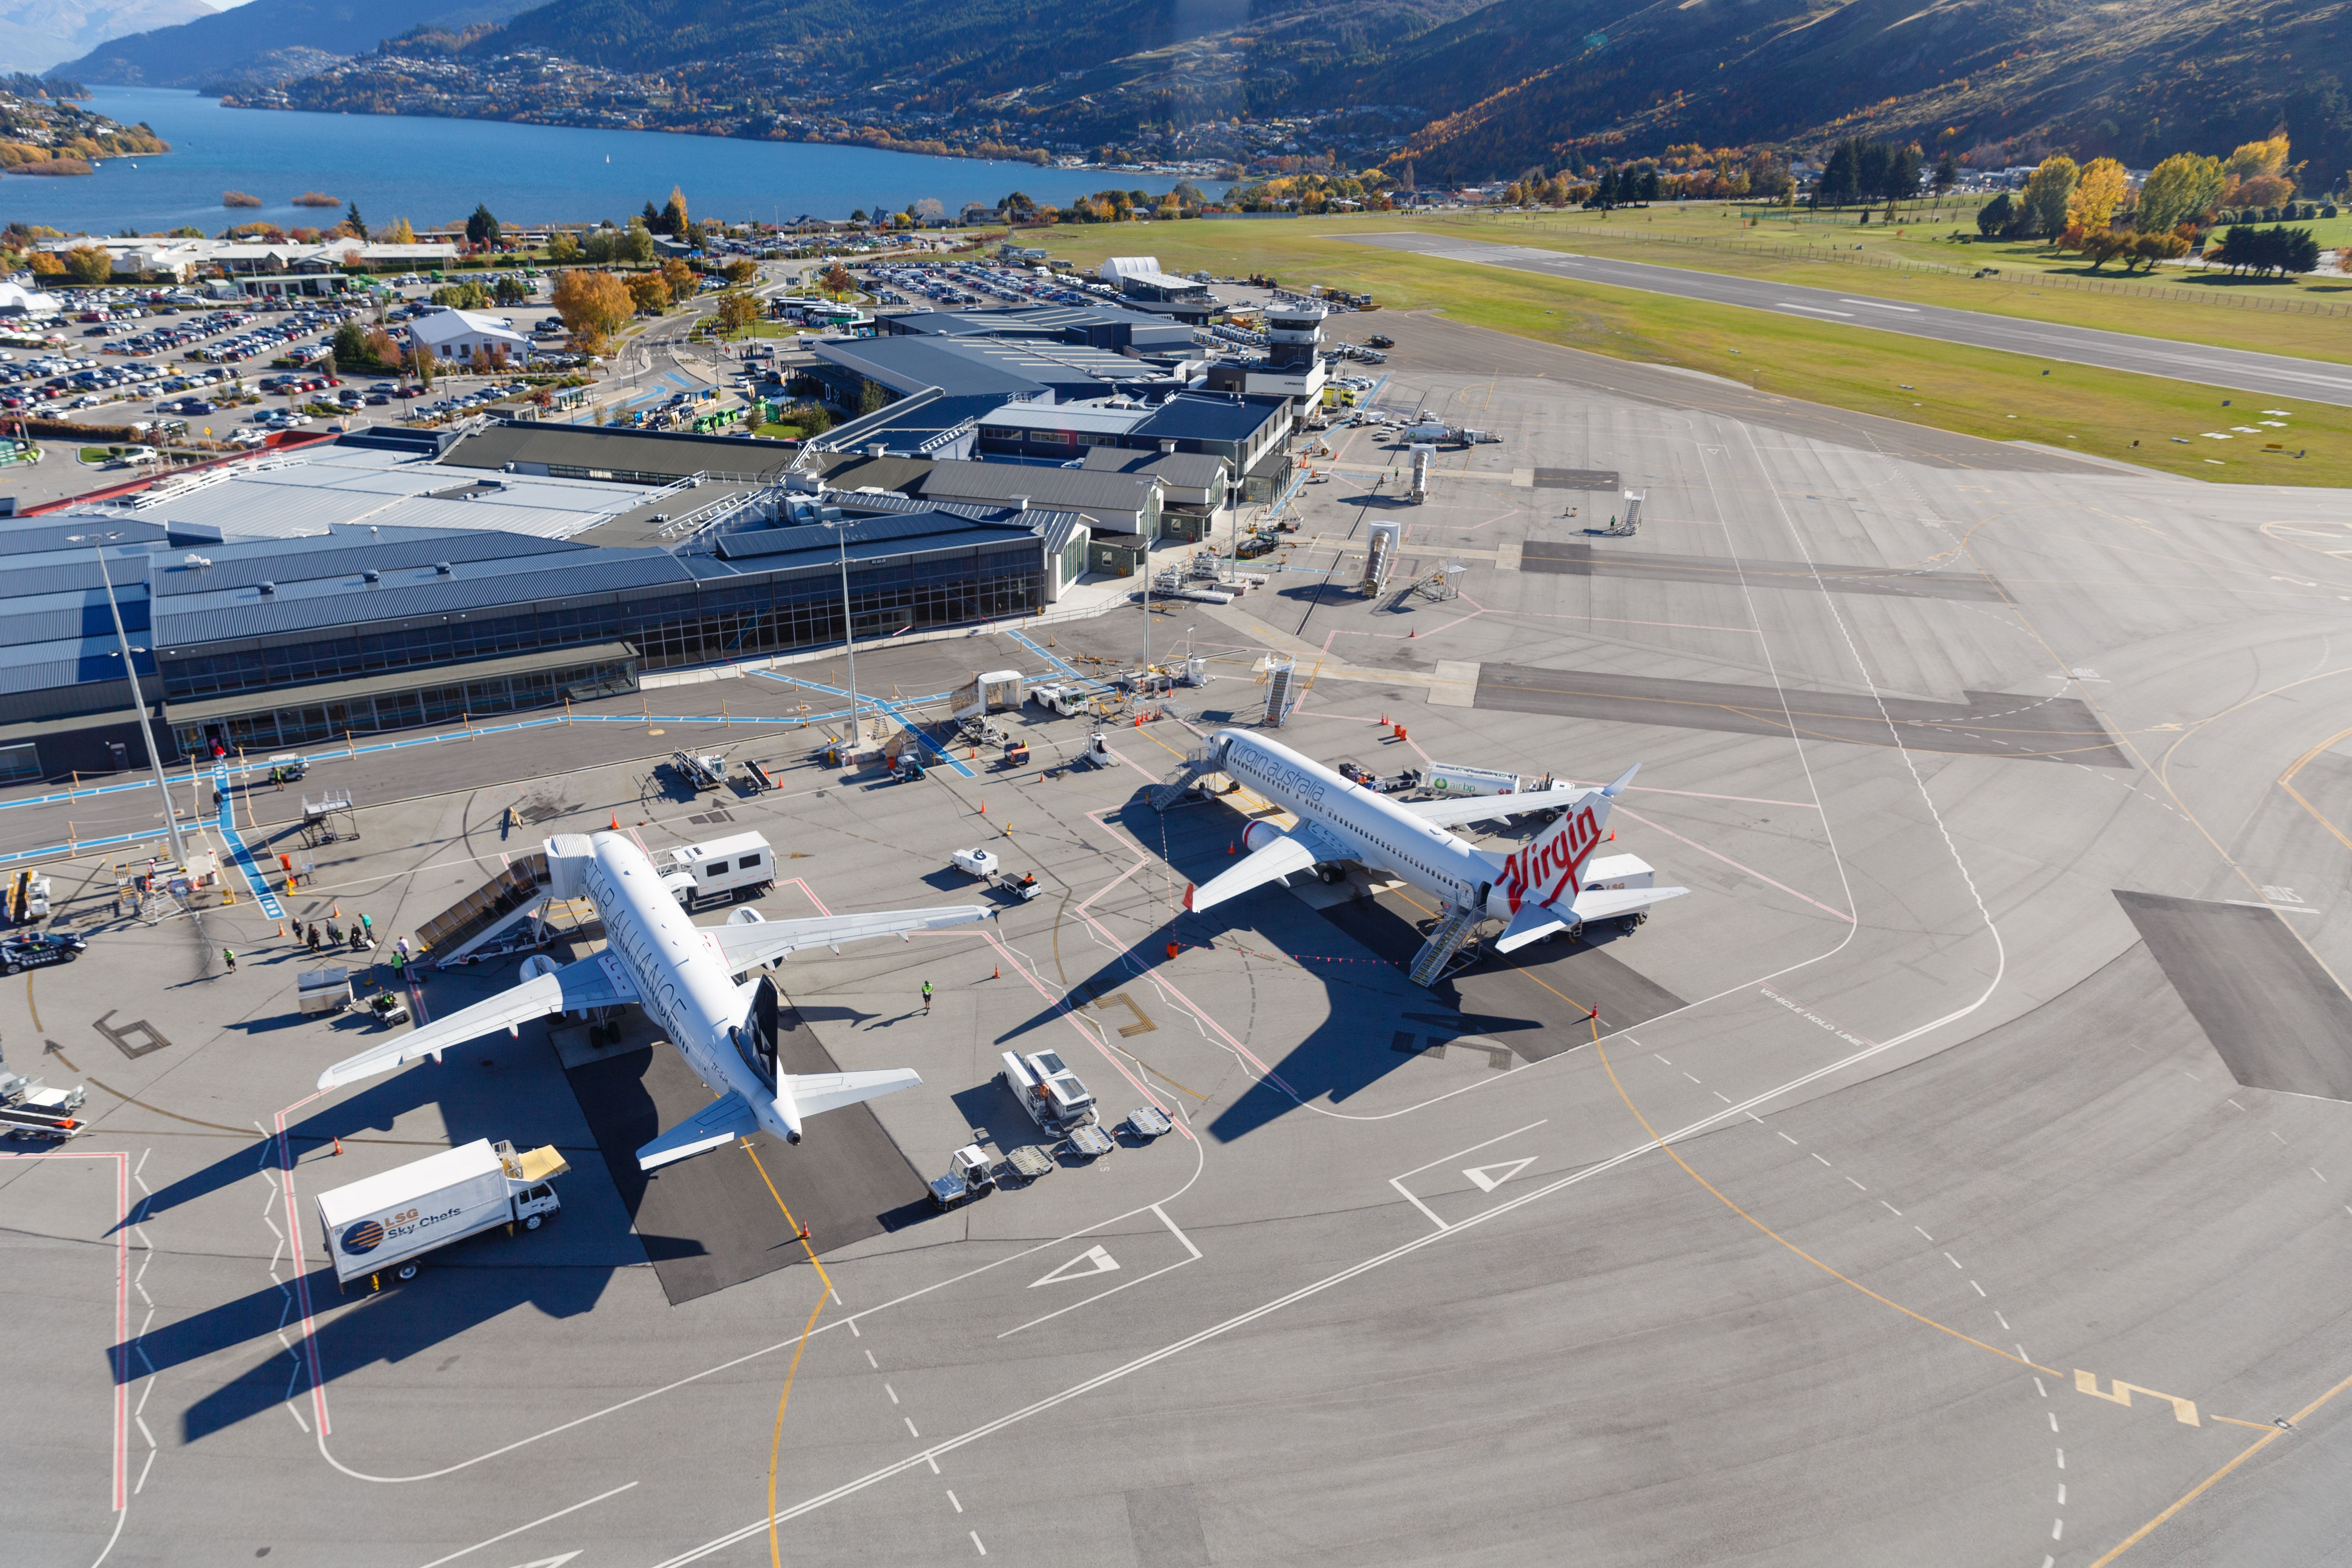 Queenstown, New Zealand - May 4, 2018 : Queenstown Airport is located in Frankton, Otago, New Zealand, and serves the resort town of Queenstown.